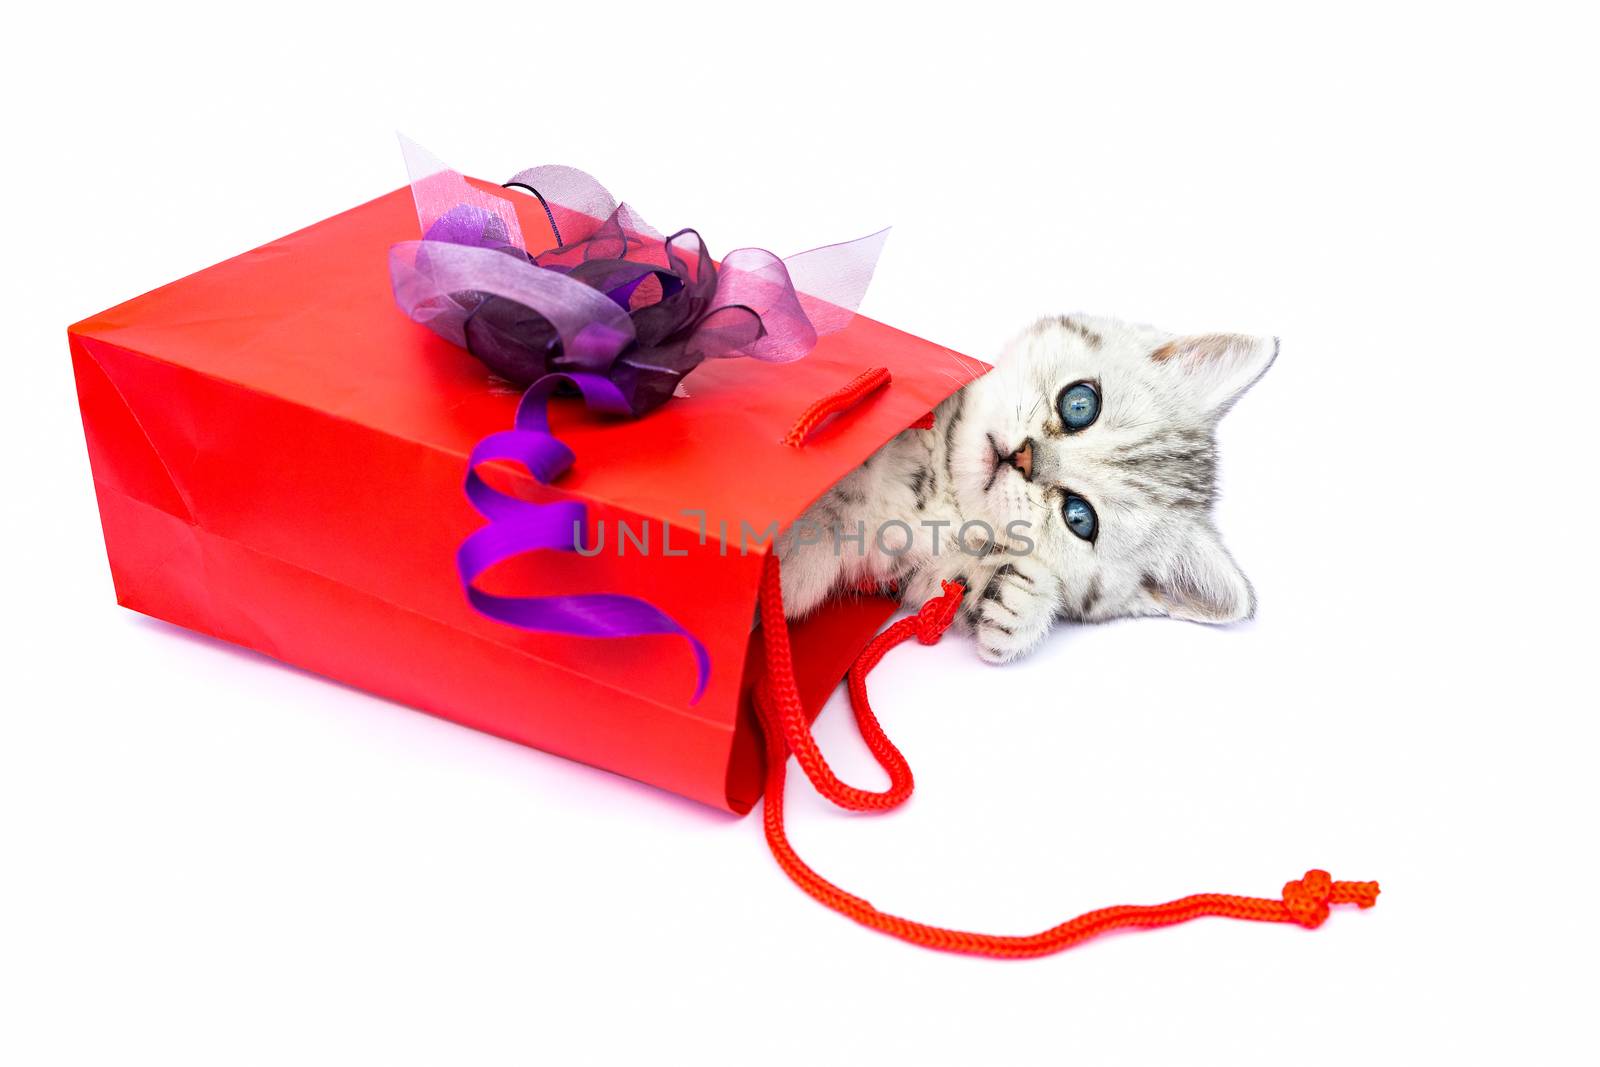 Young kitten lying in red bag with decoration as present isolated on white background